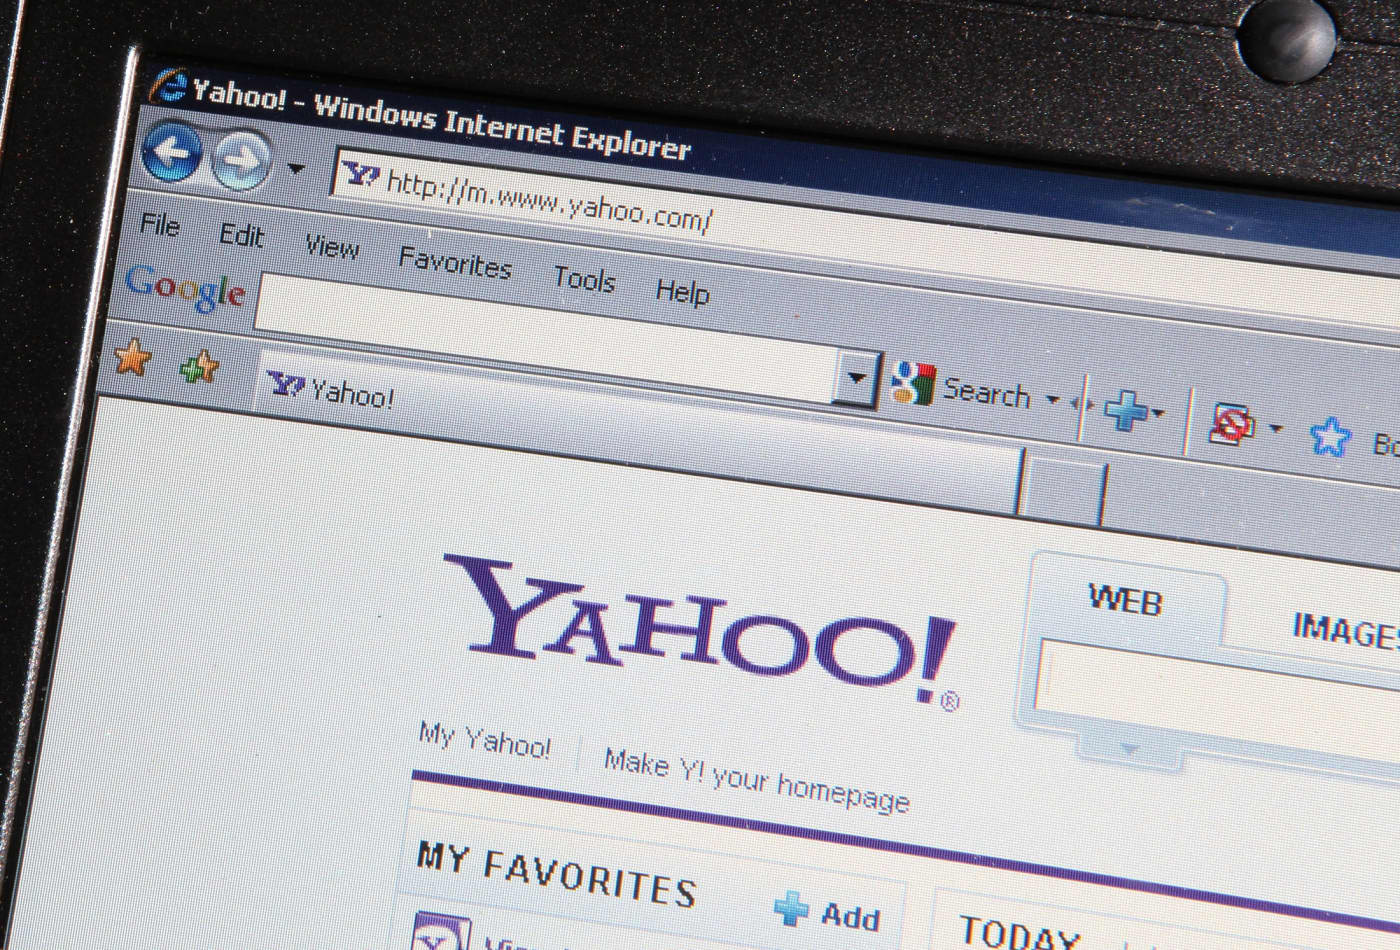 What To Do If You Got Email From Yahoo About A Data Breach Settlement